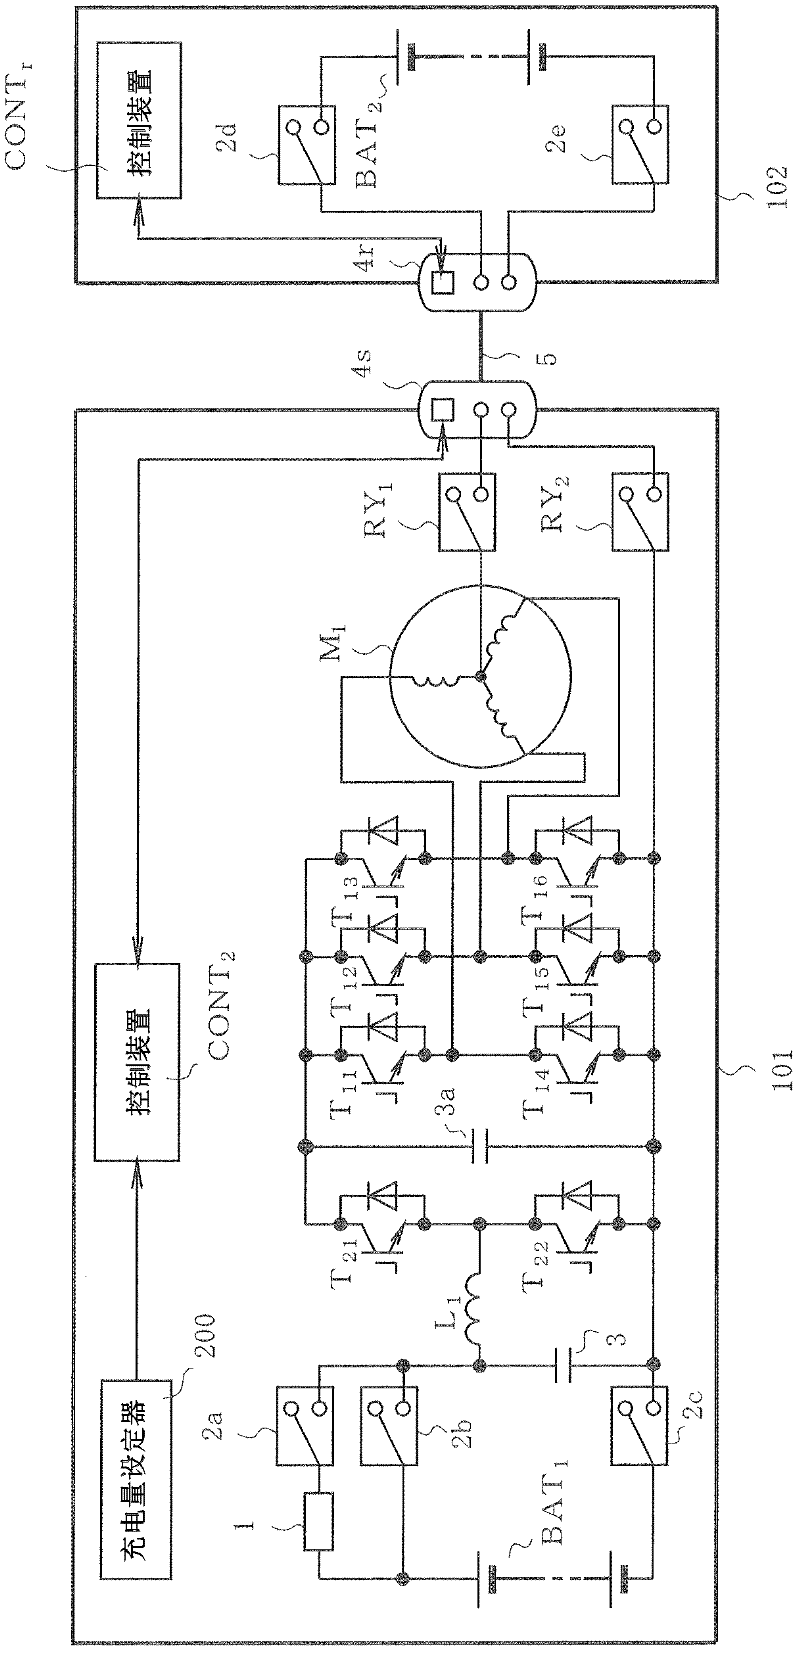 Inter-vehicle charging device